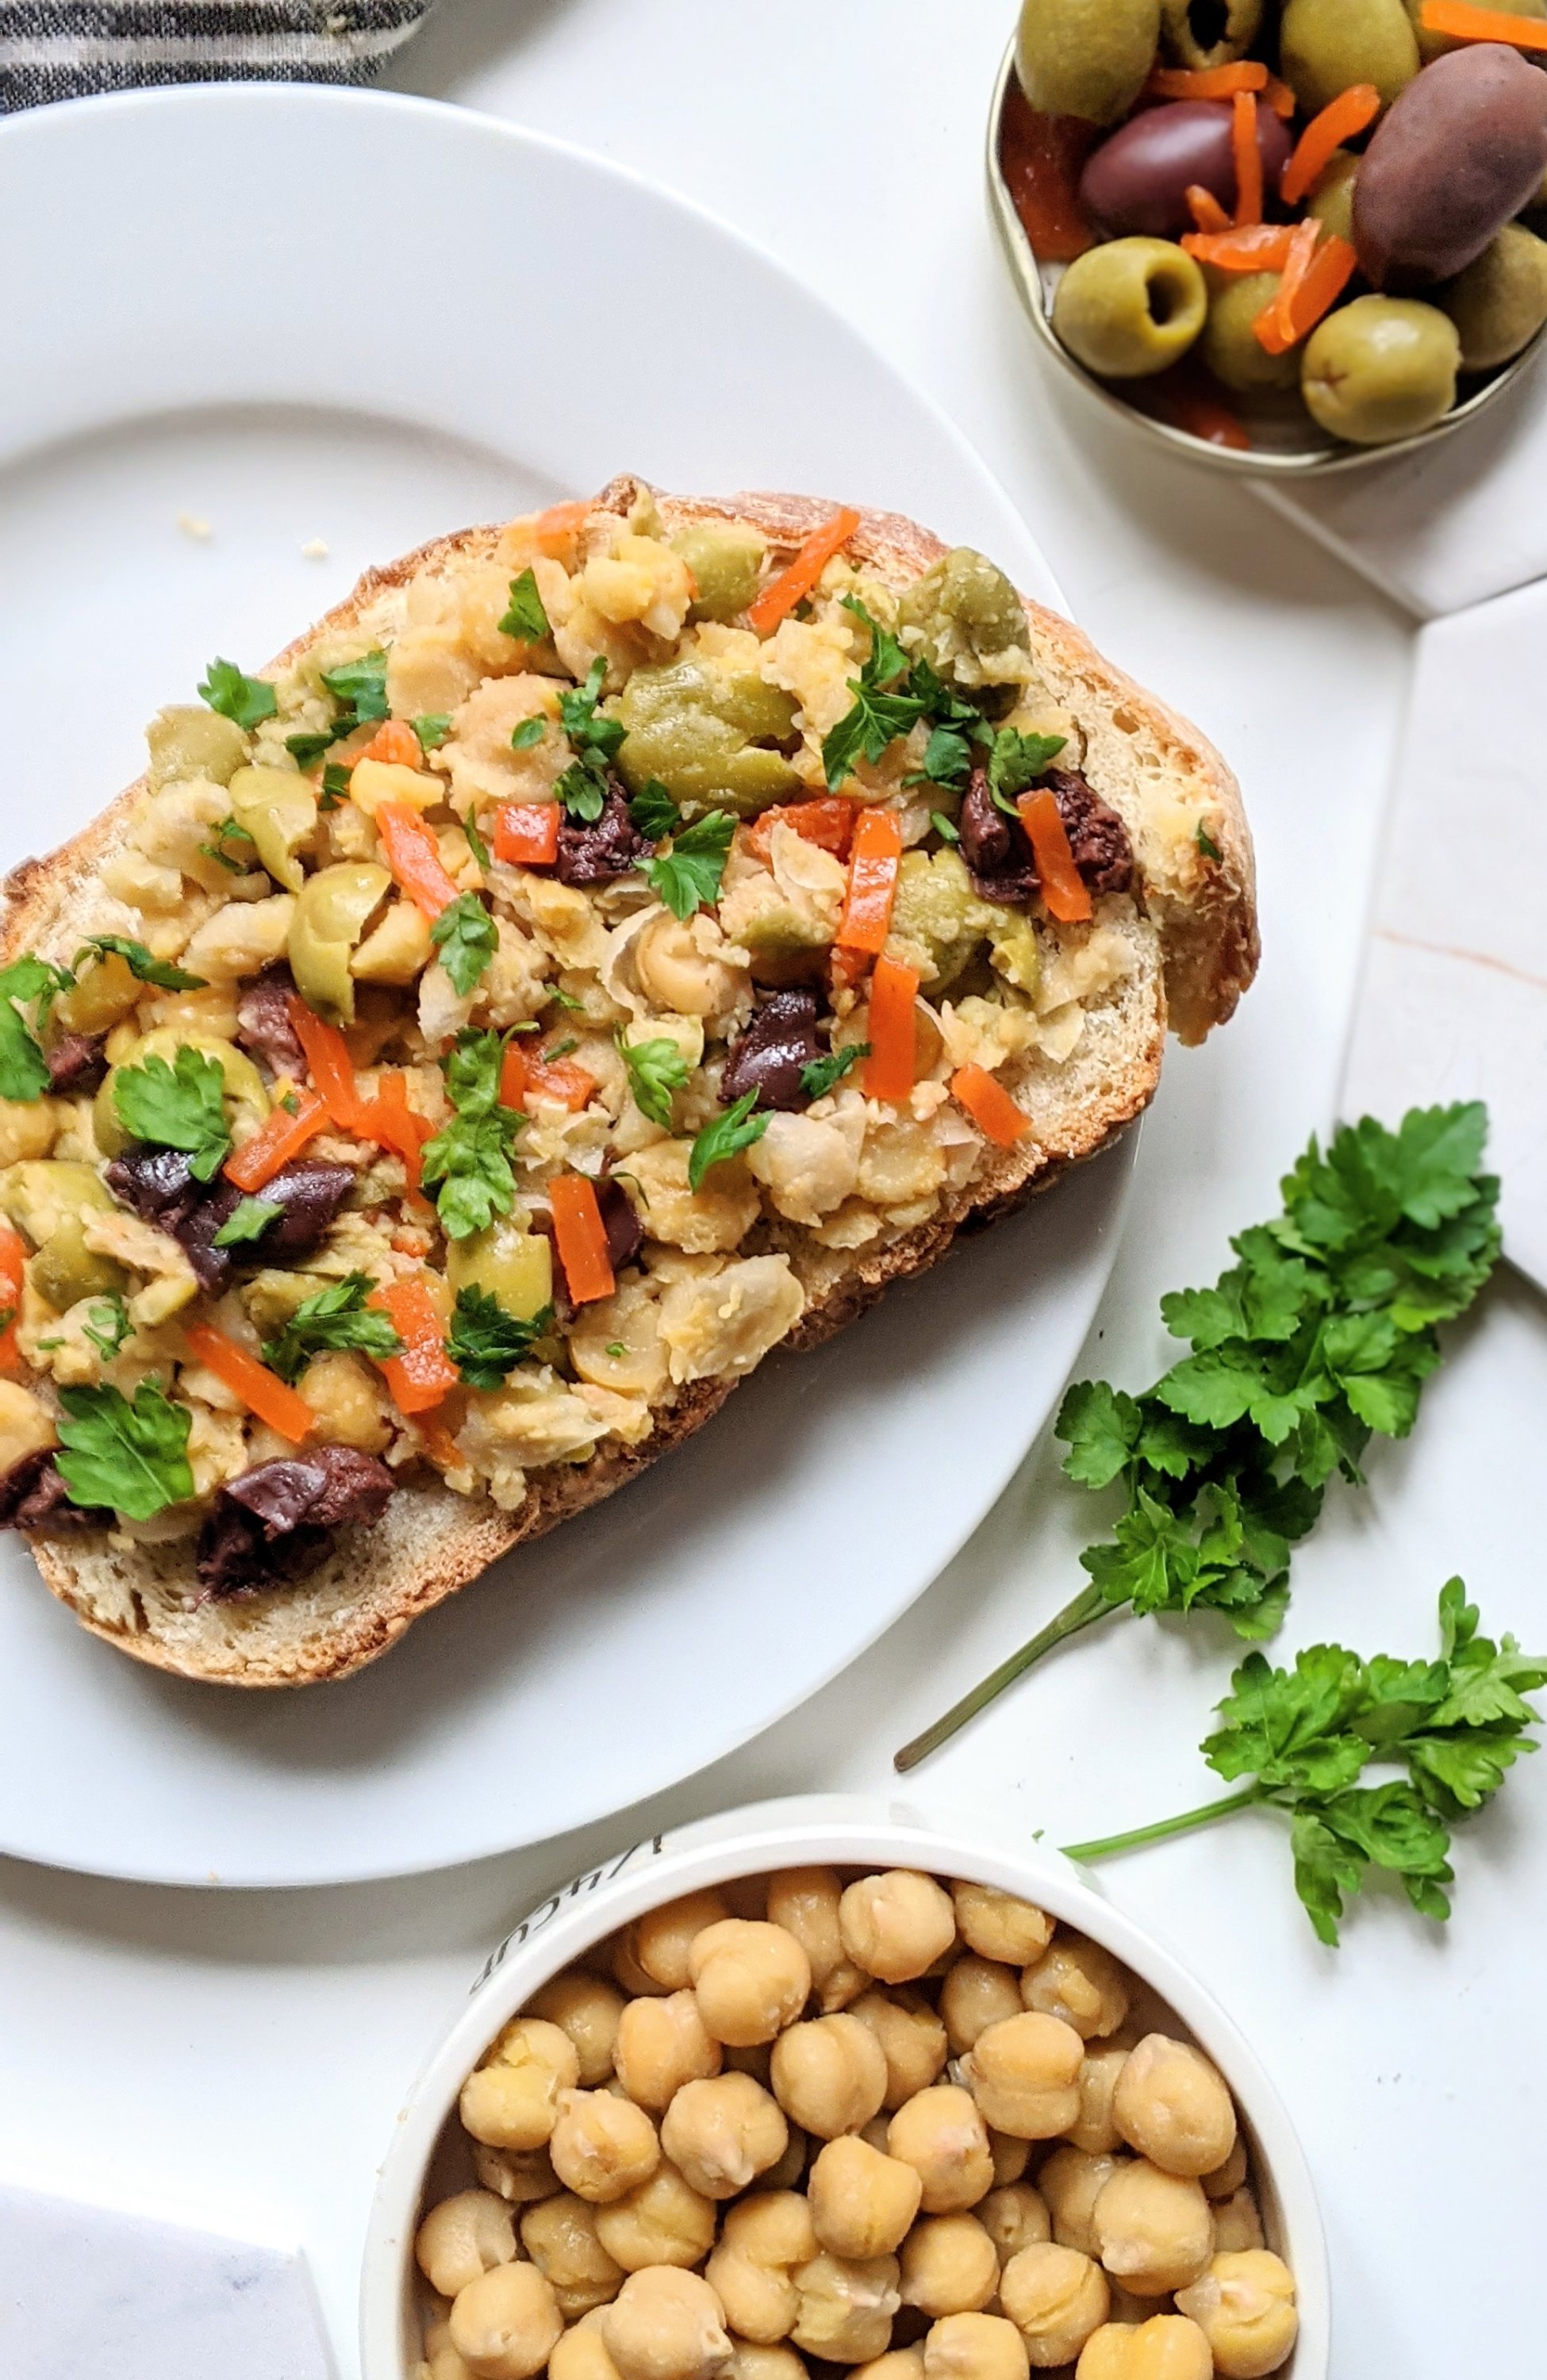 vegan chickpea smash recipe with olives healthy vegetarian lunch recipes with chickpeas no cook gluten free lunches for school or work olive lovers sandwich